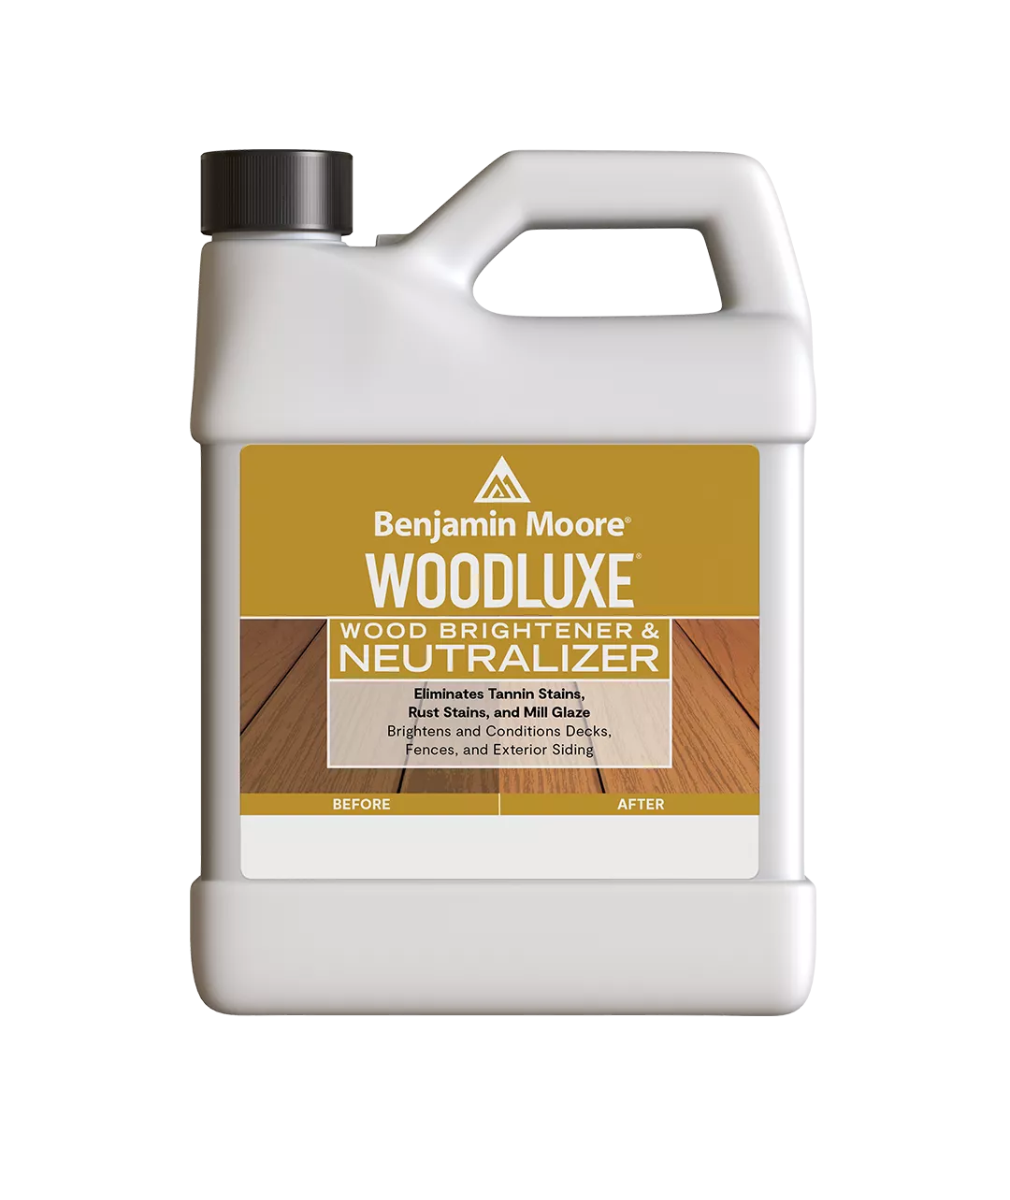 Benjamin Moore Woodluxe Wood Brightener & Neutralizer Gallon available to shop at Regal Paint Centers in Maryland, Virginia and DC.